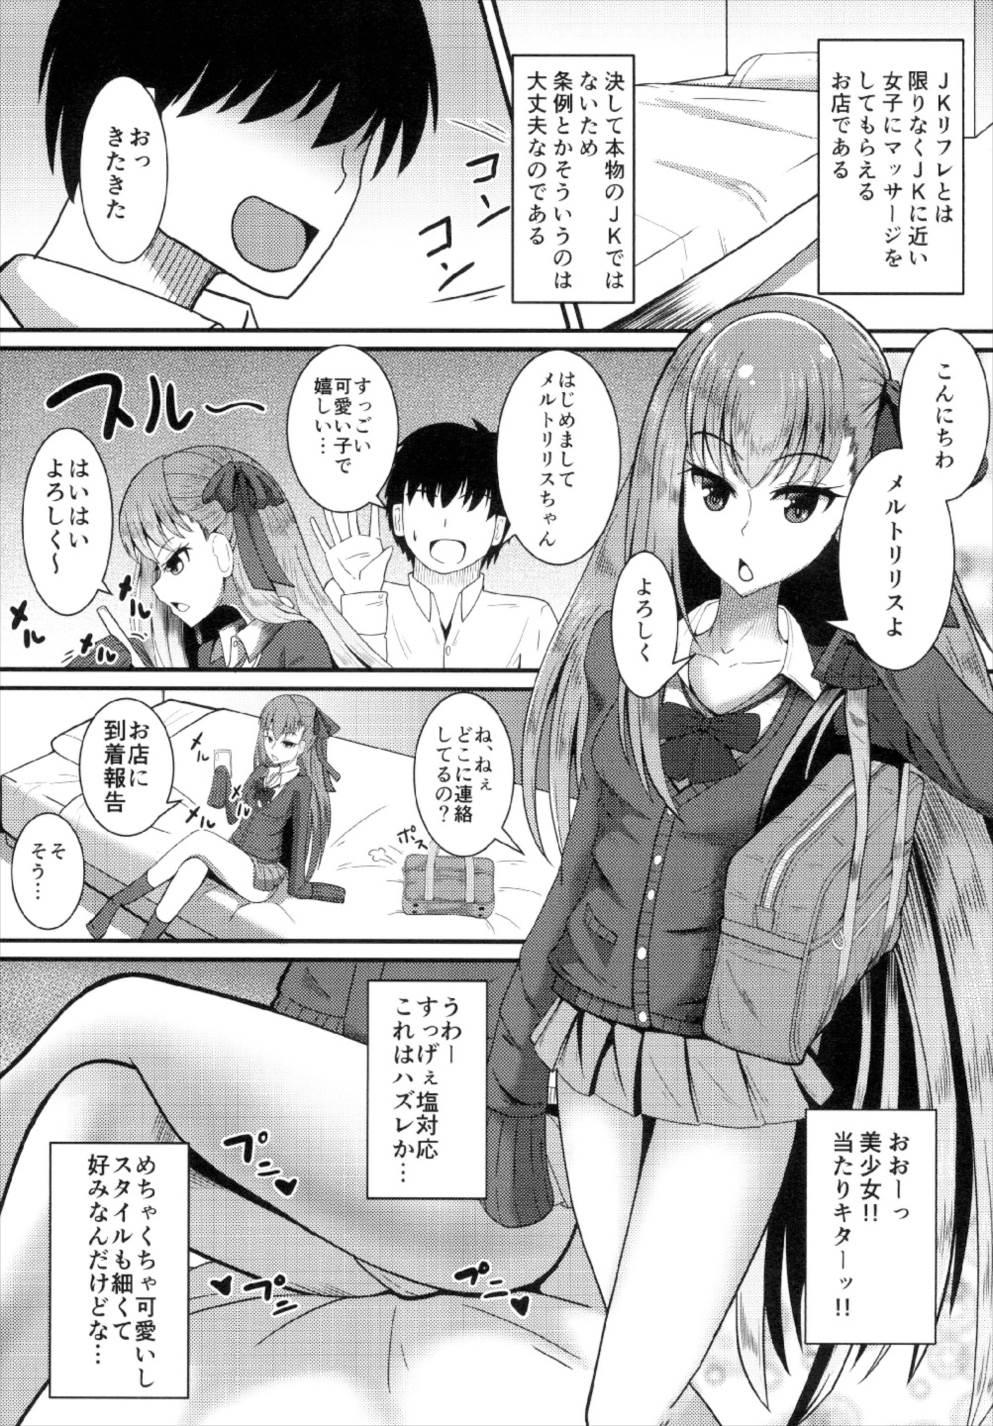 Internal Chaldea JK Collection Vol. 2 Meltlilith - Fate grand order Pussy Lick - Page 3